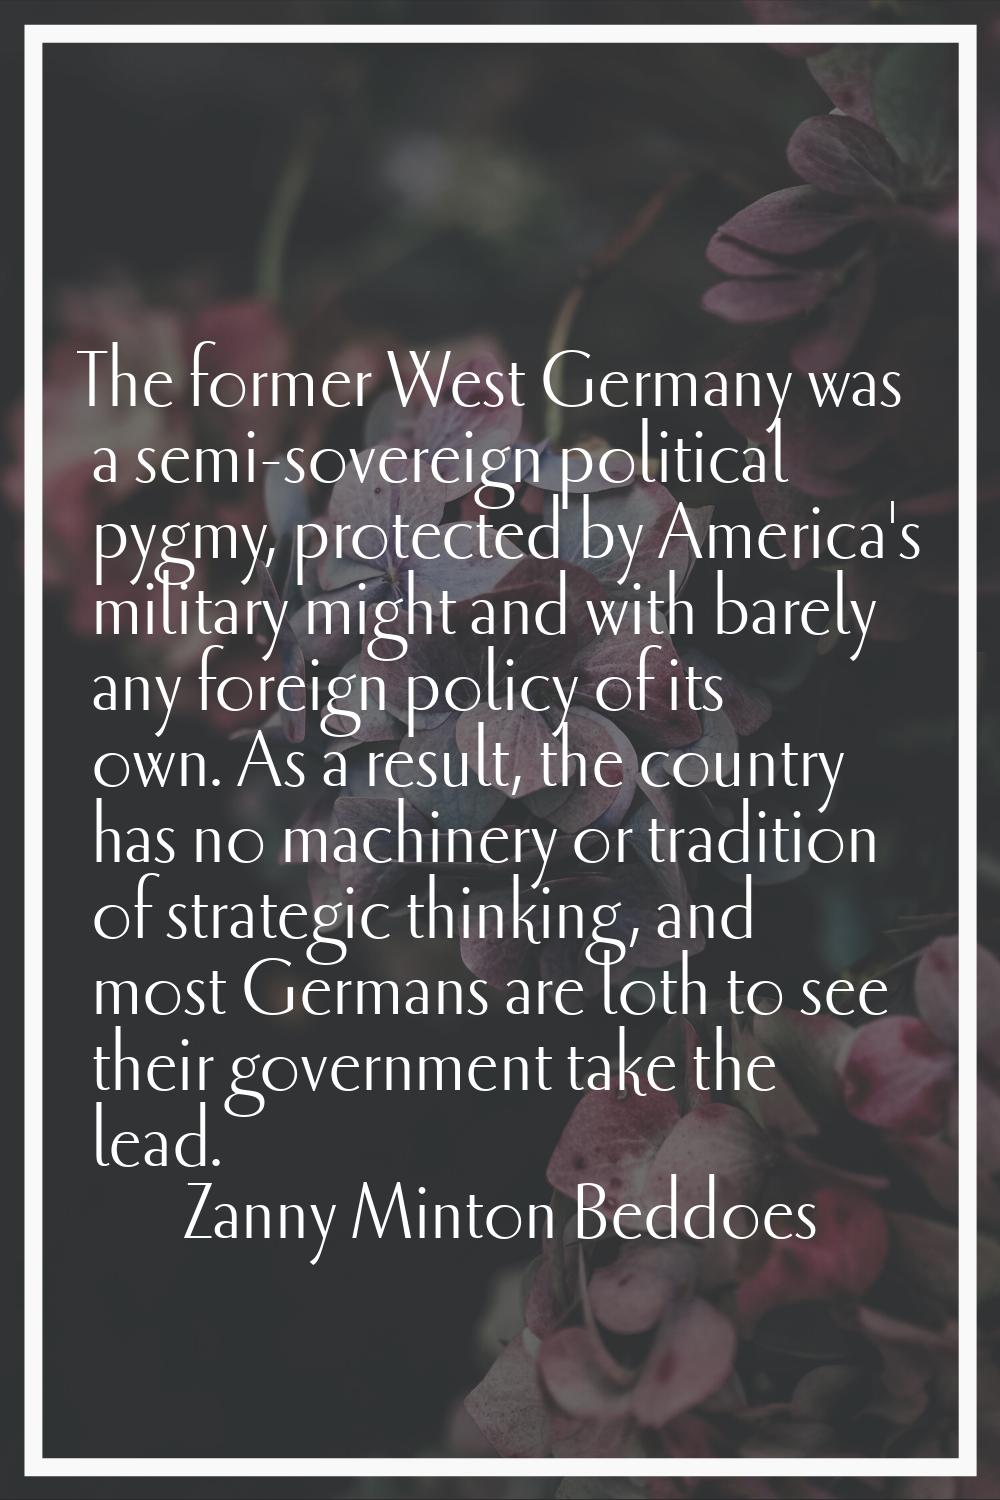 The former West Germany was a semi-sovereign political pygmy, protected by America's military might